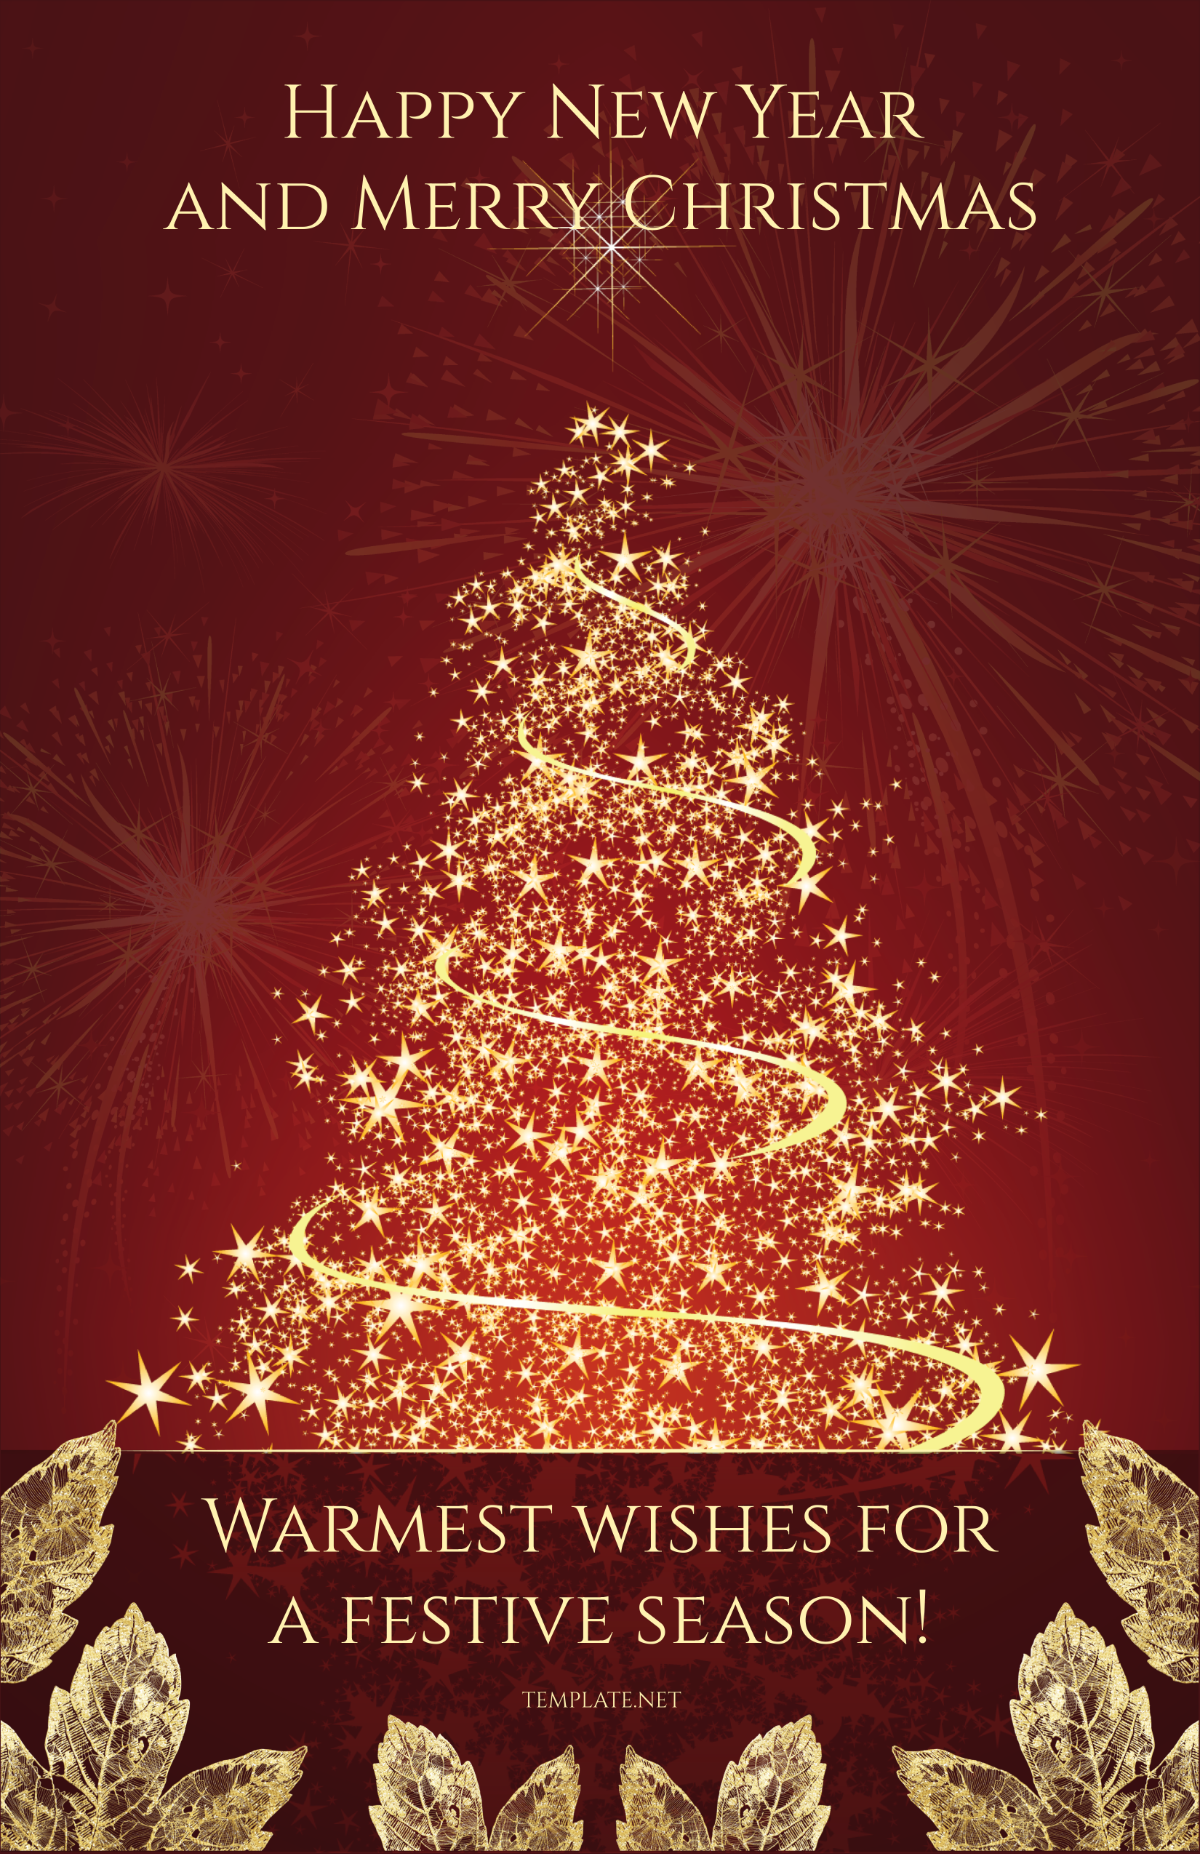 Happy New Year and Merry Christmas Poster Template